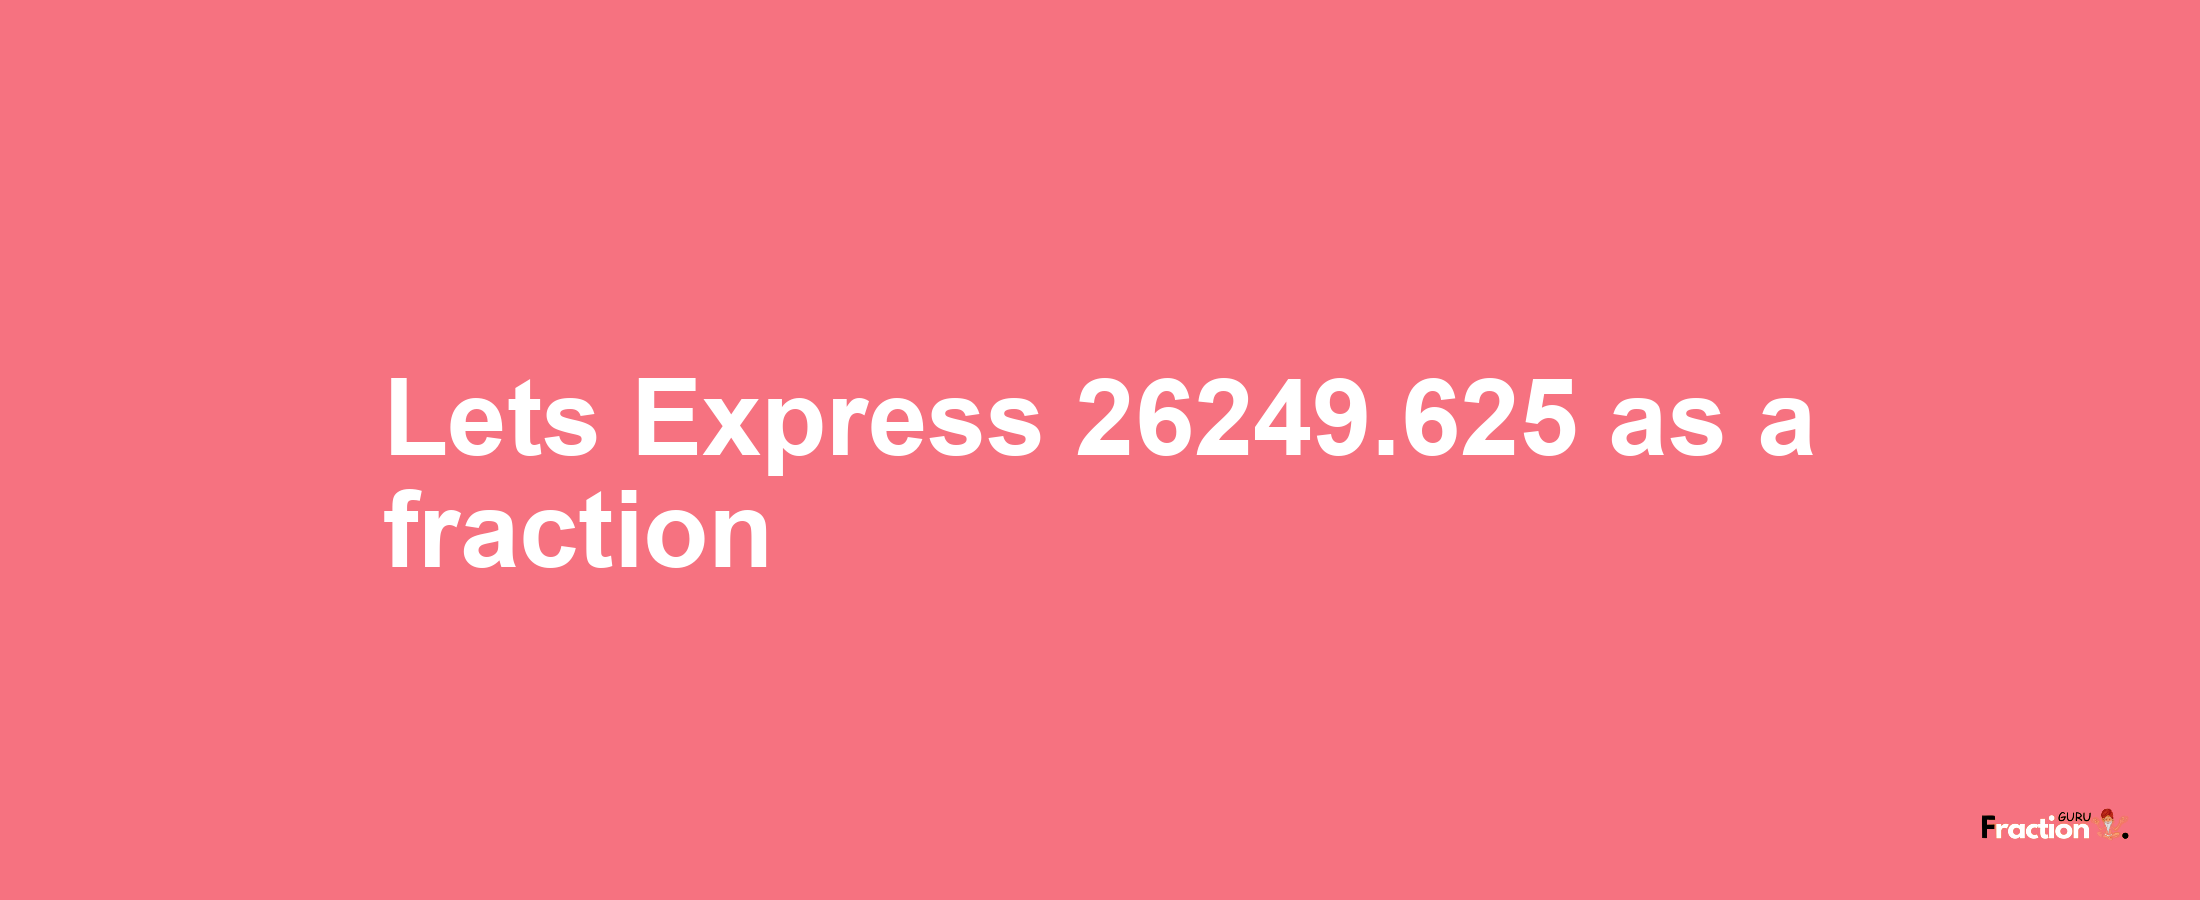 Lets Express 26249.625 as afraction